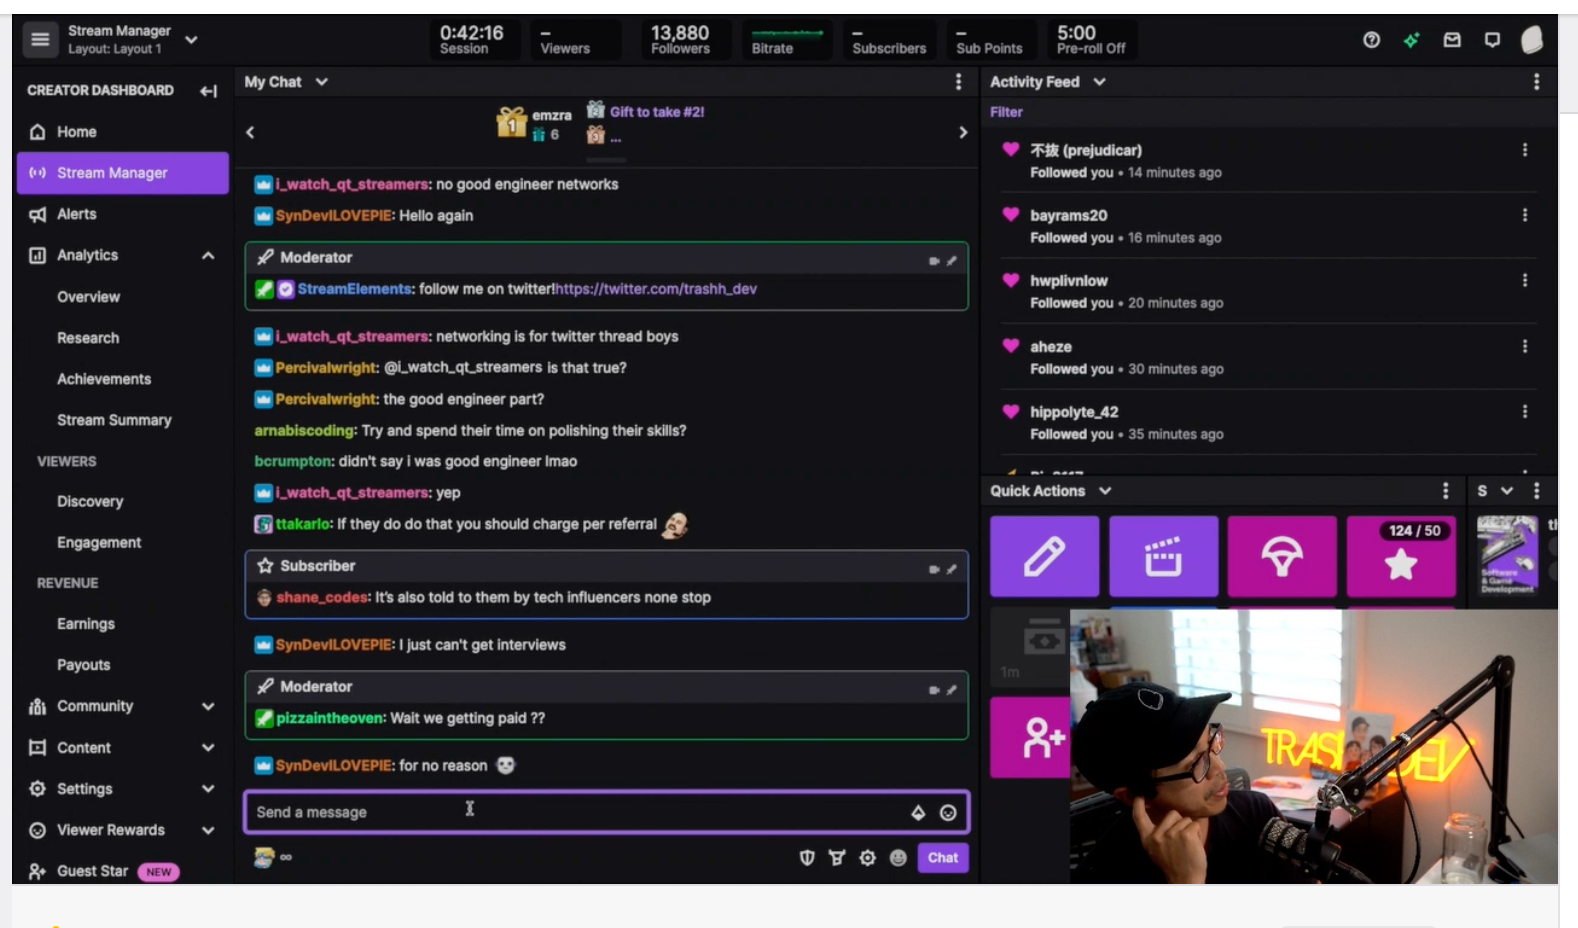 A sample screenshot of a Twitch streamer with their Twitch dashboard showing the ongoing chat conversation with their webcam view in the bottom right corner.